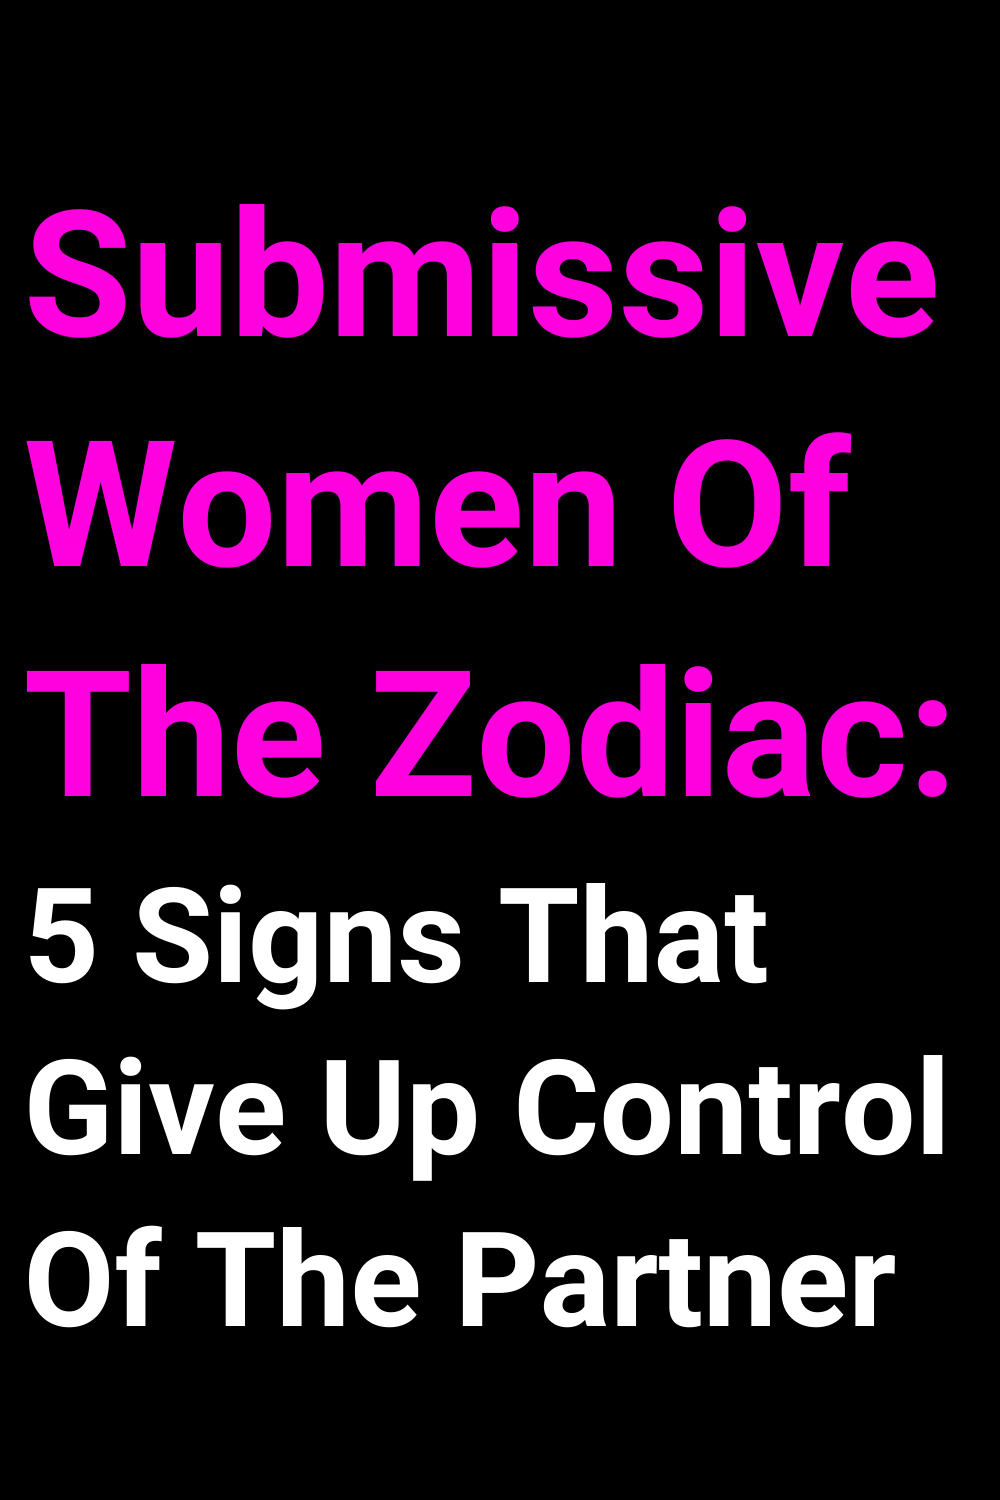 Submissive Women Of The Zodiac: 5 Signs That Give Up Control Of The Partner